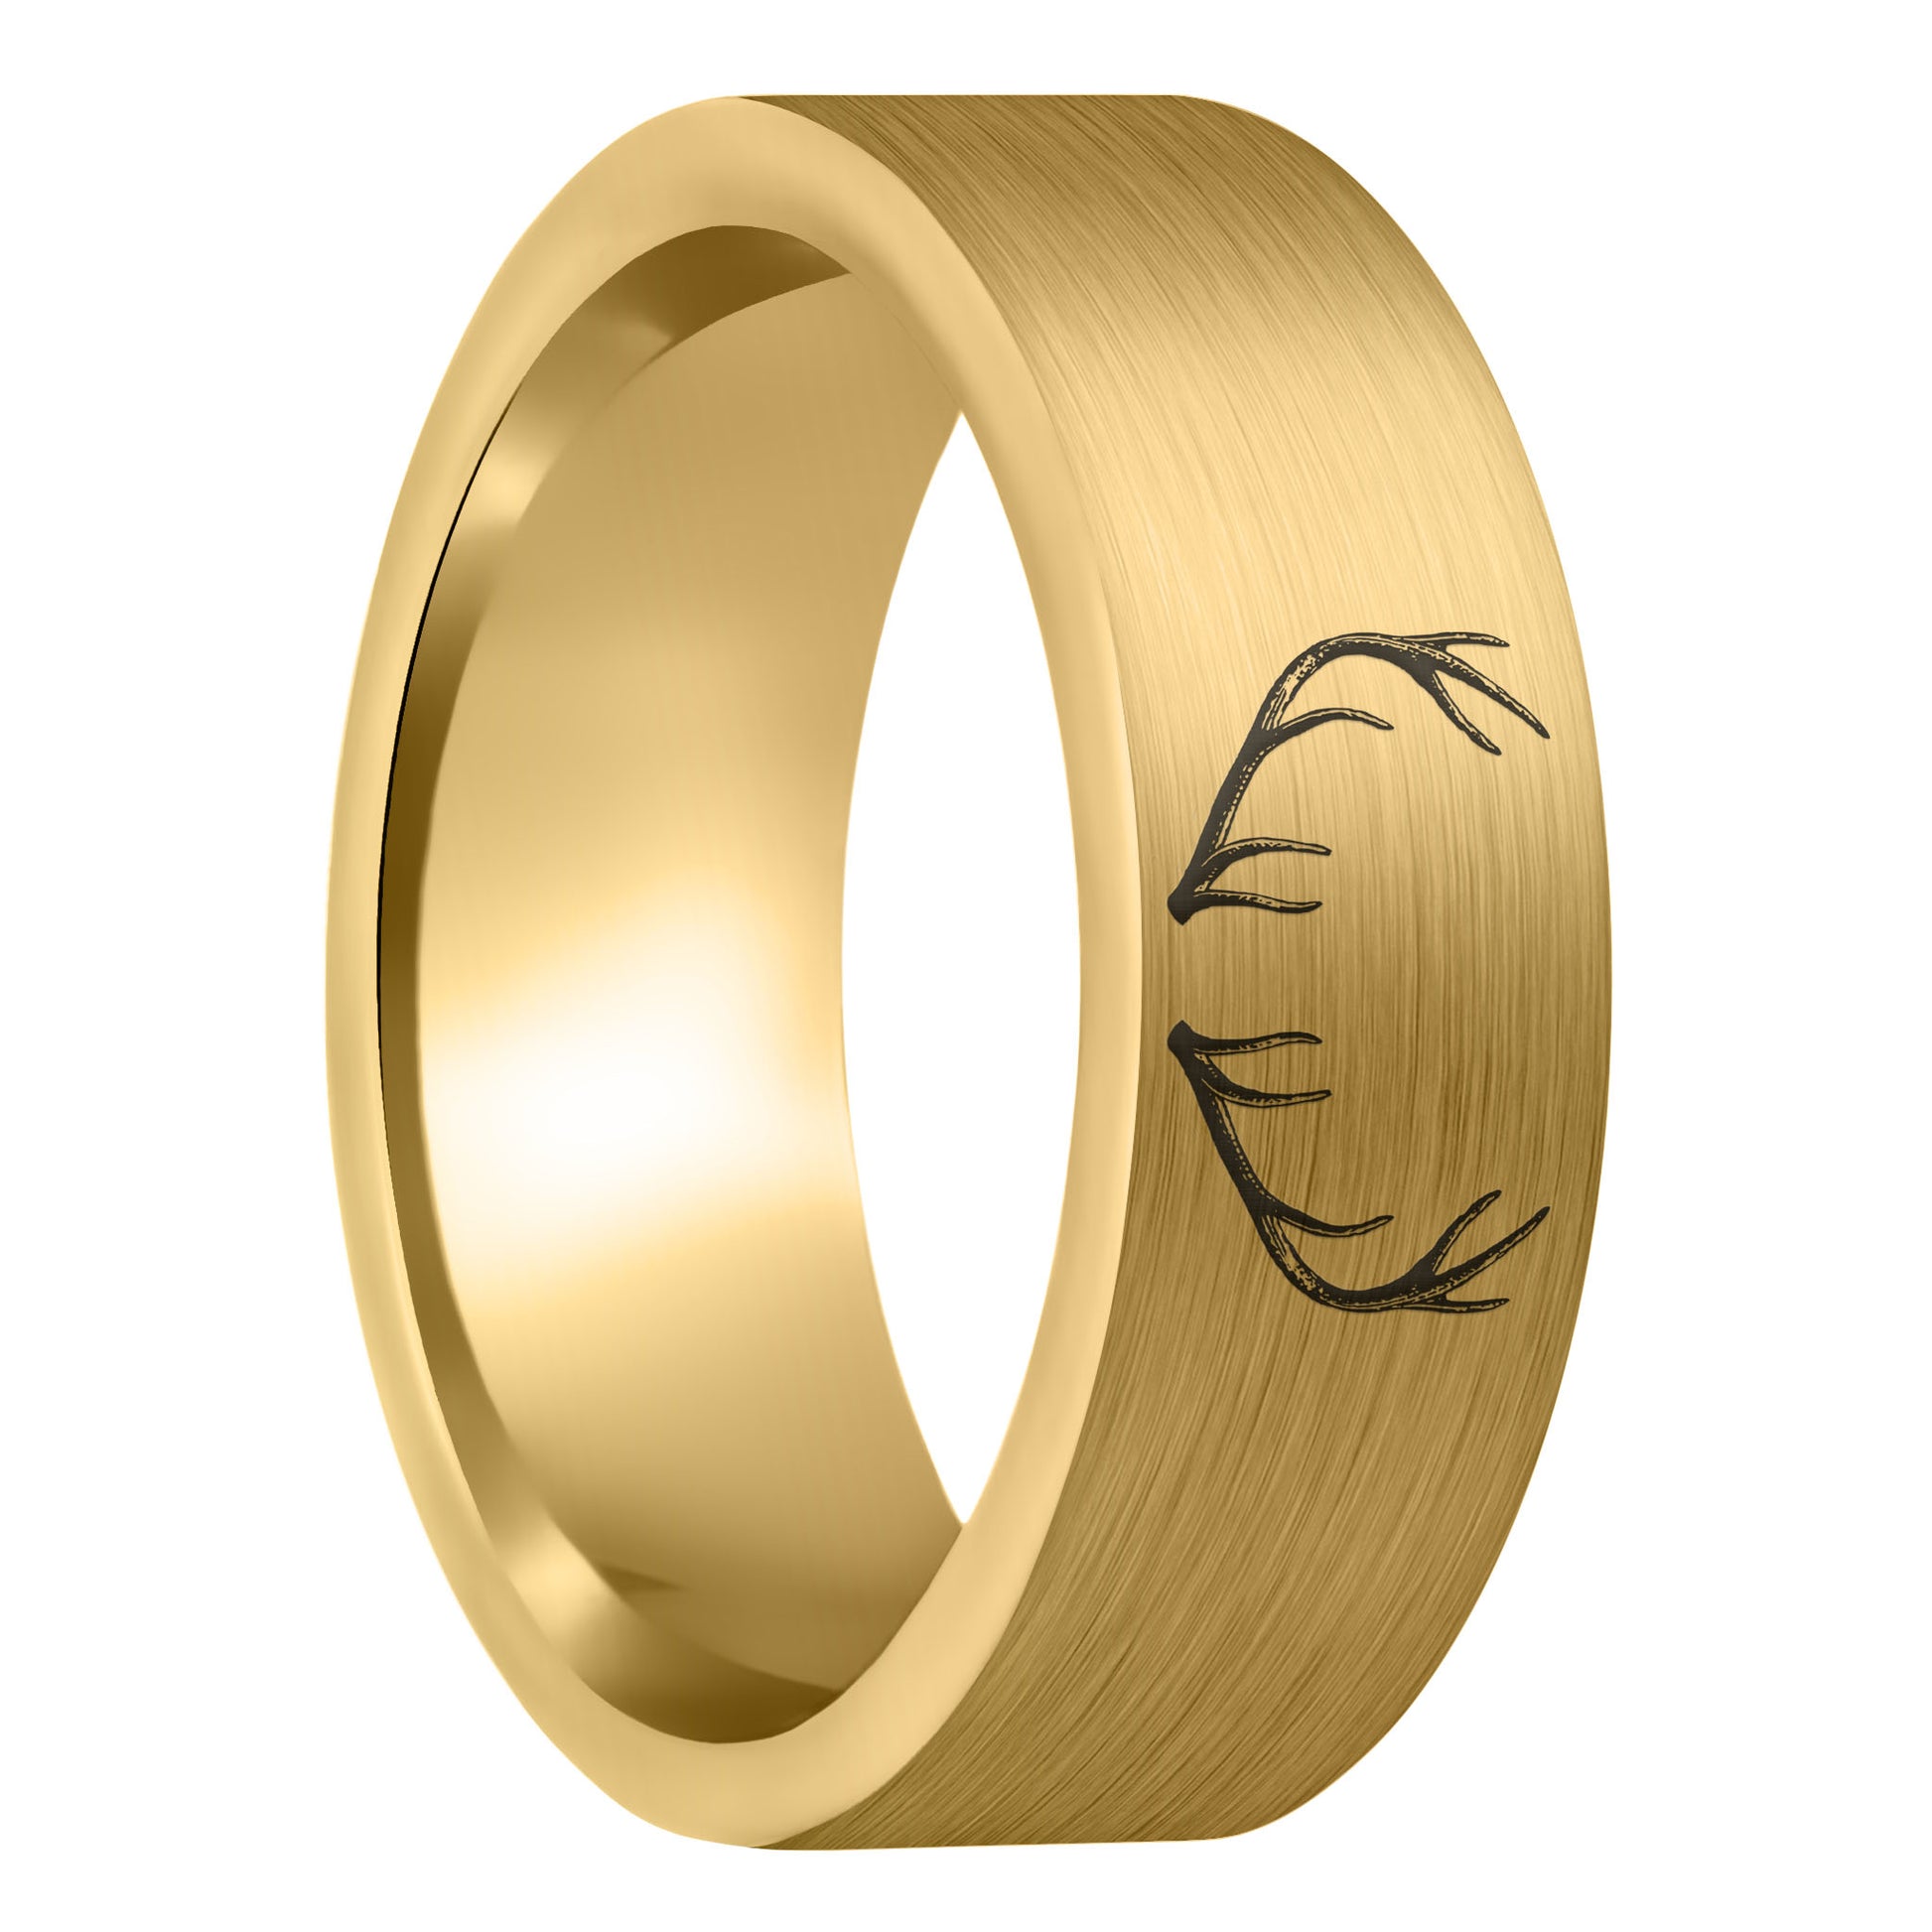 A antler engraved brushed gold tungsten men's wedding band displayed on a plain white background.